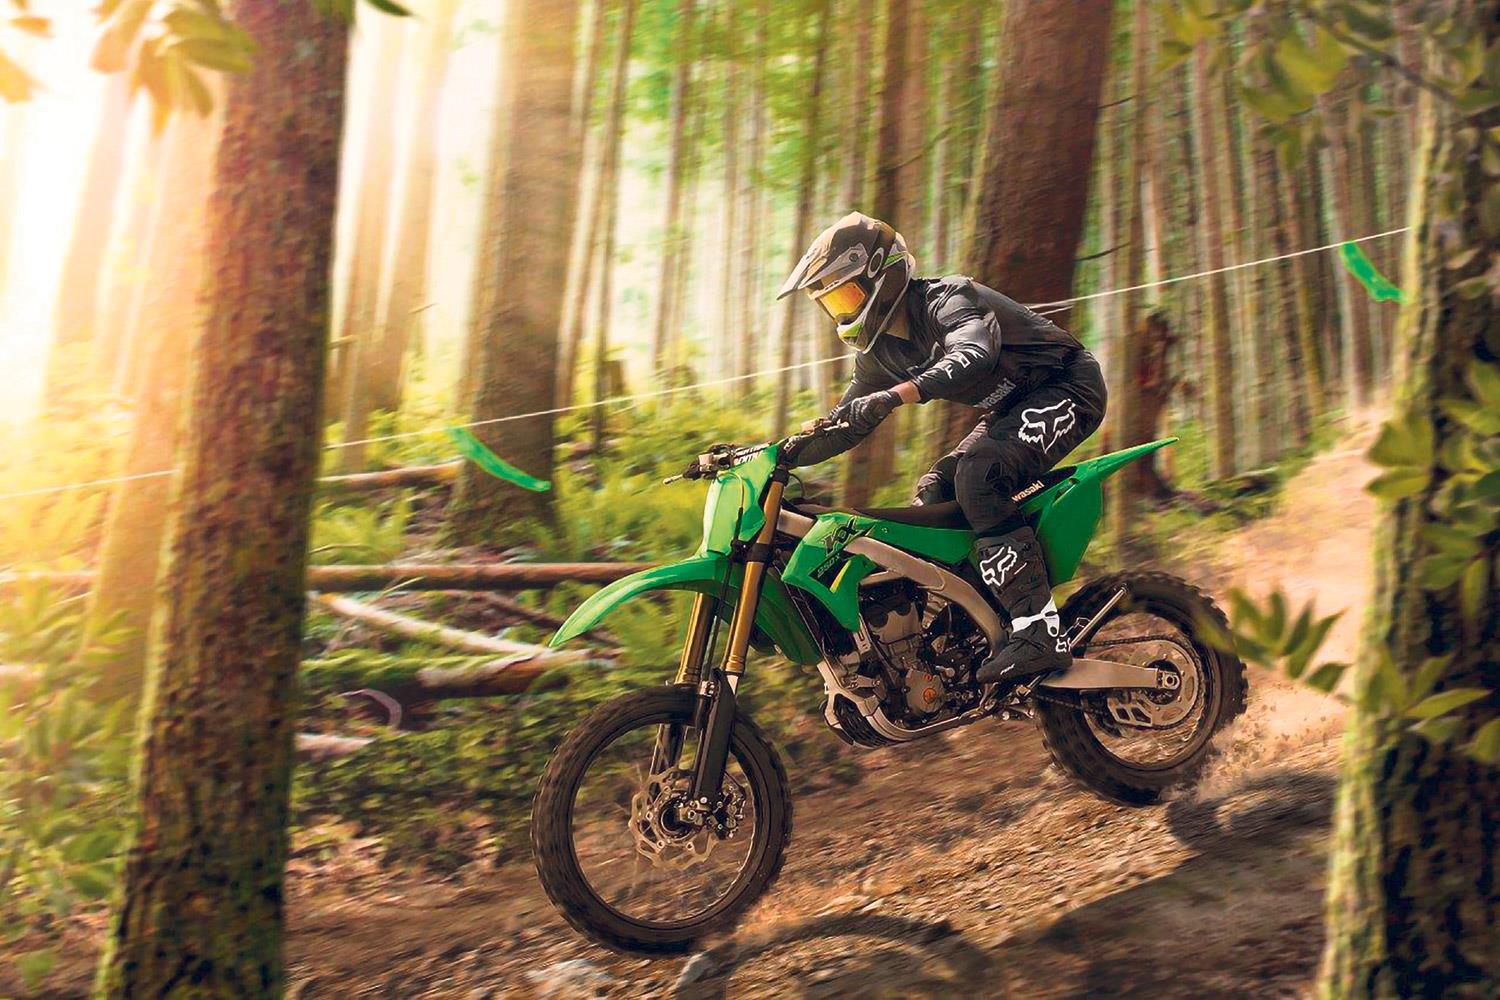 animation shuttle bandage Get cross: Kawasaki off road range kicks off with one for the kids | MCN